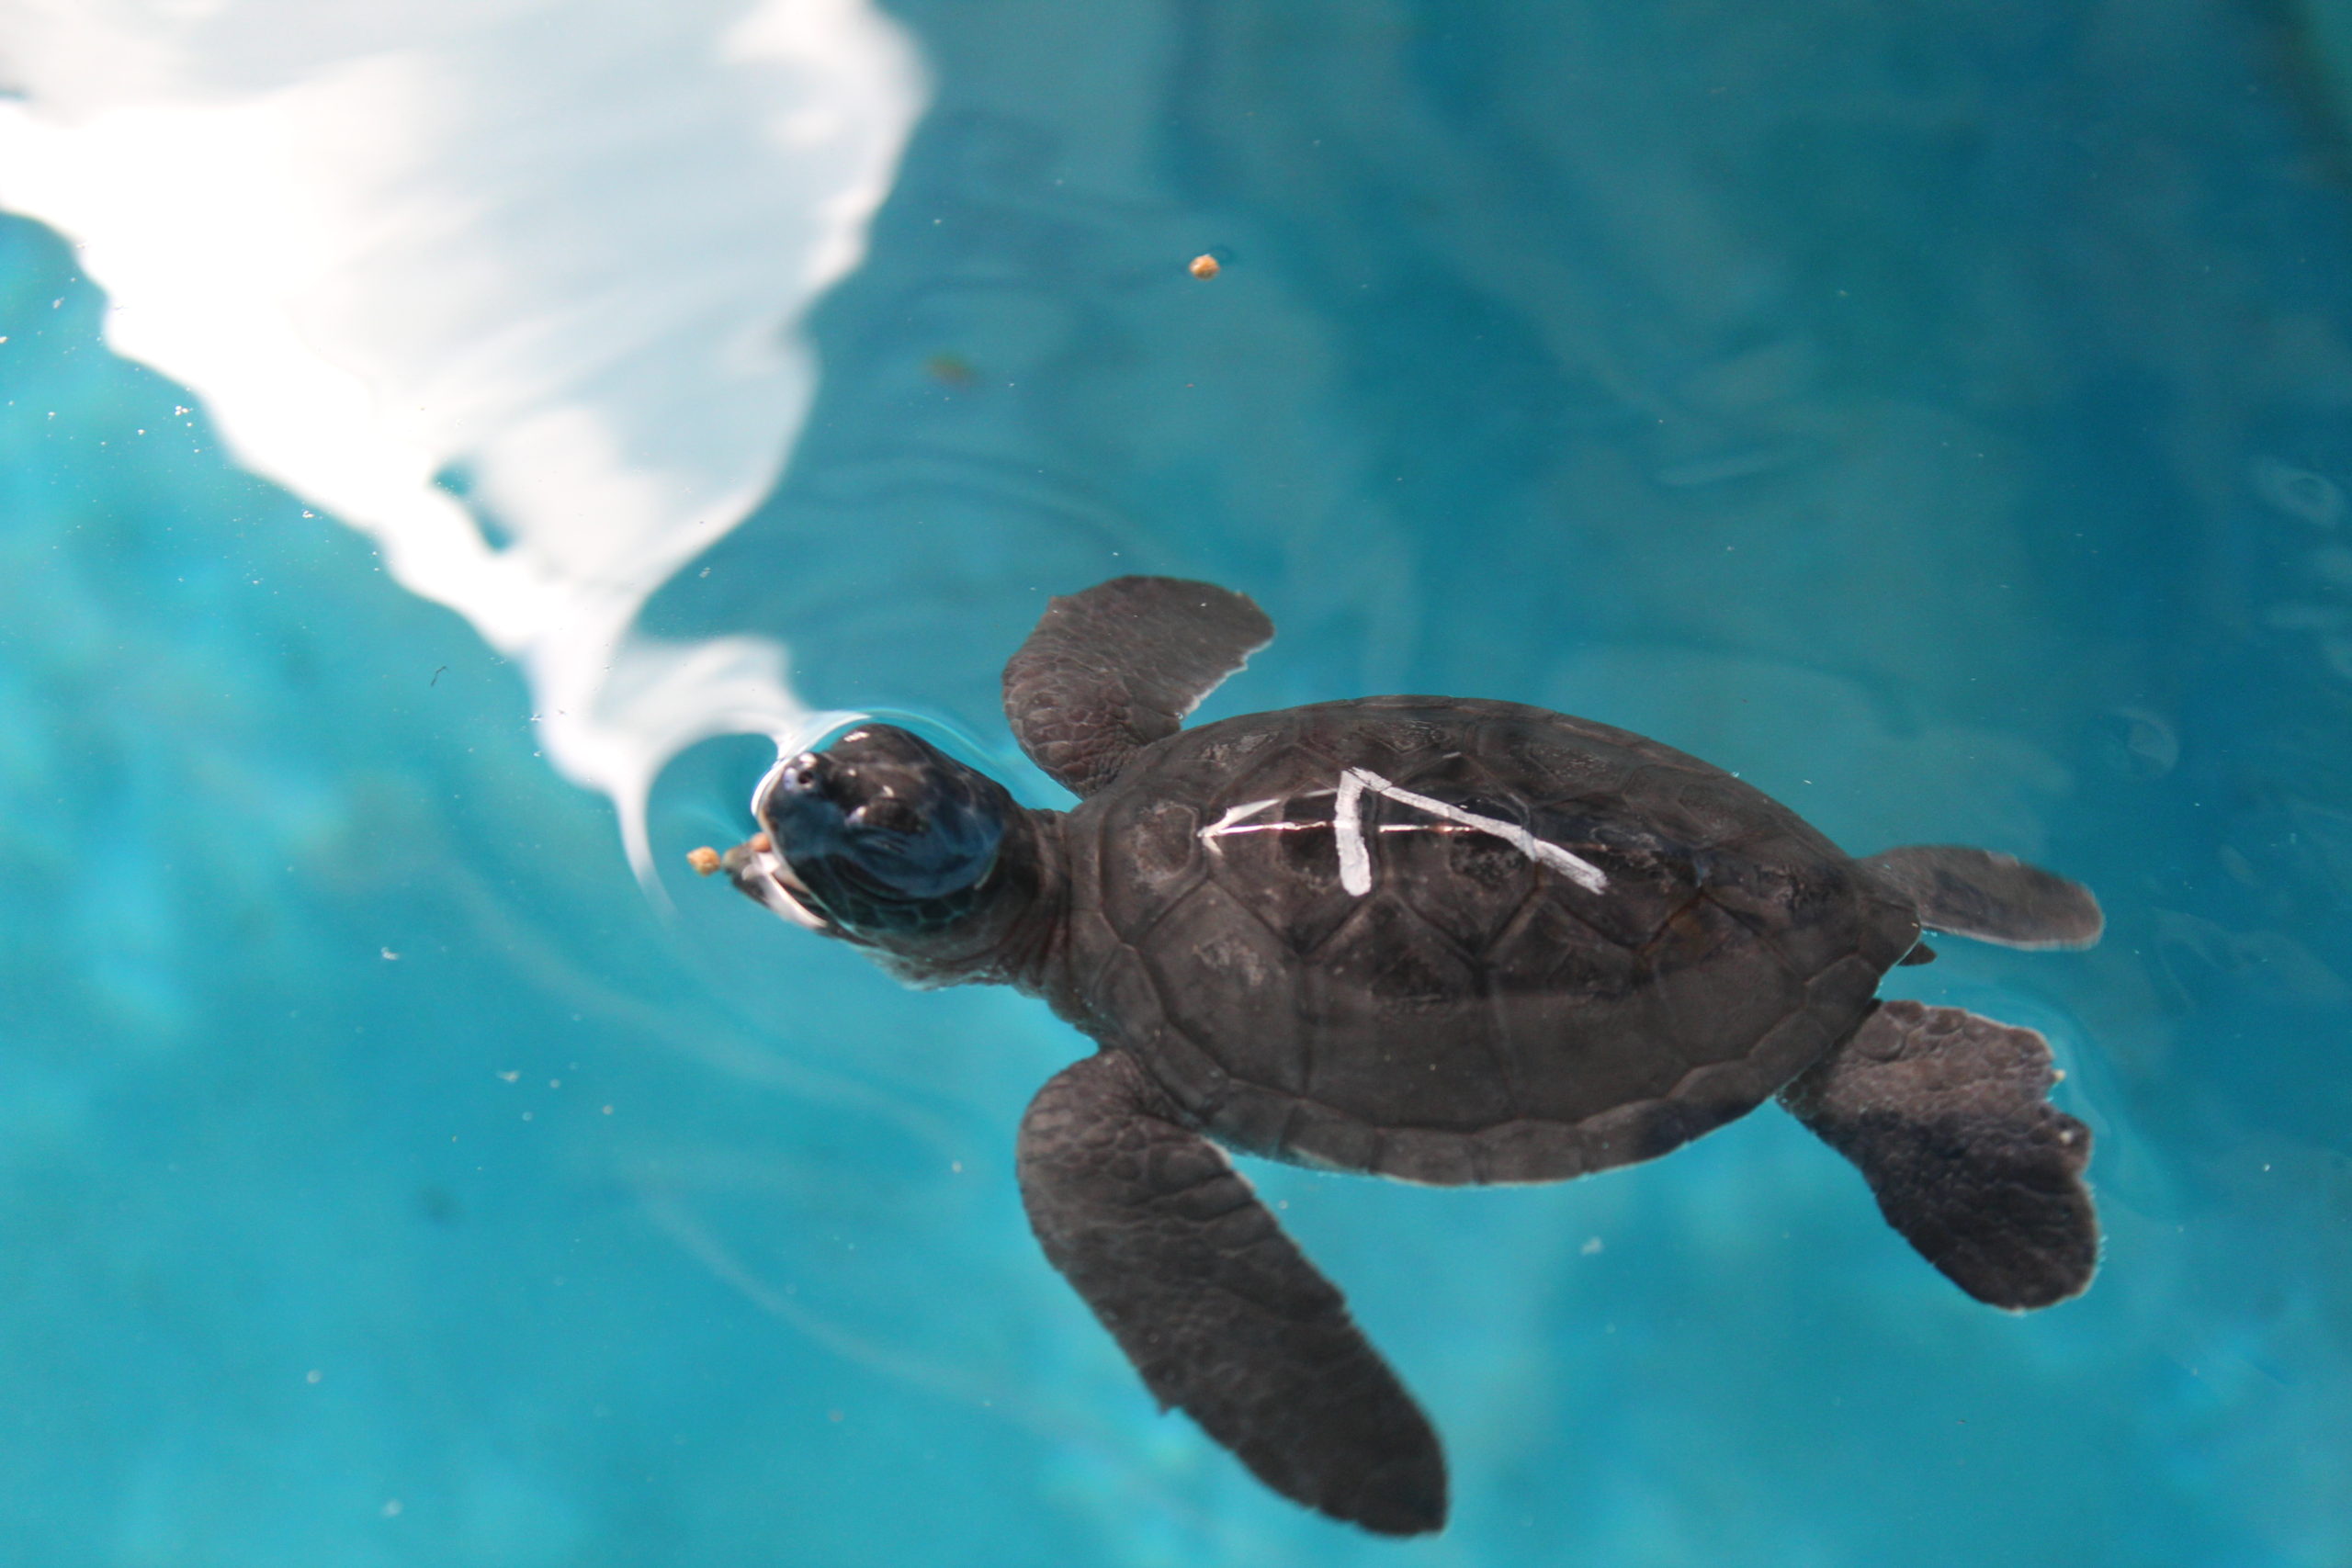 A sea turtle hatchling...too cute!